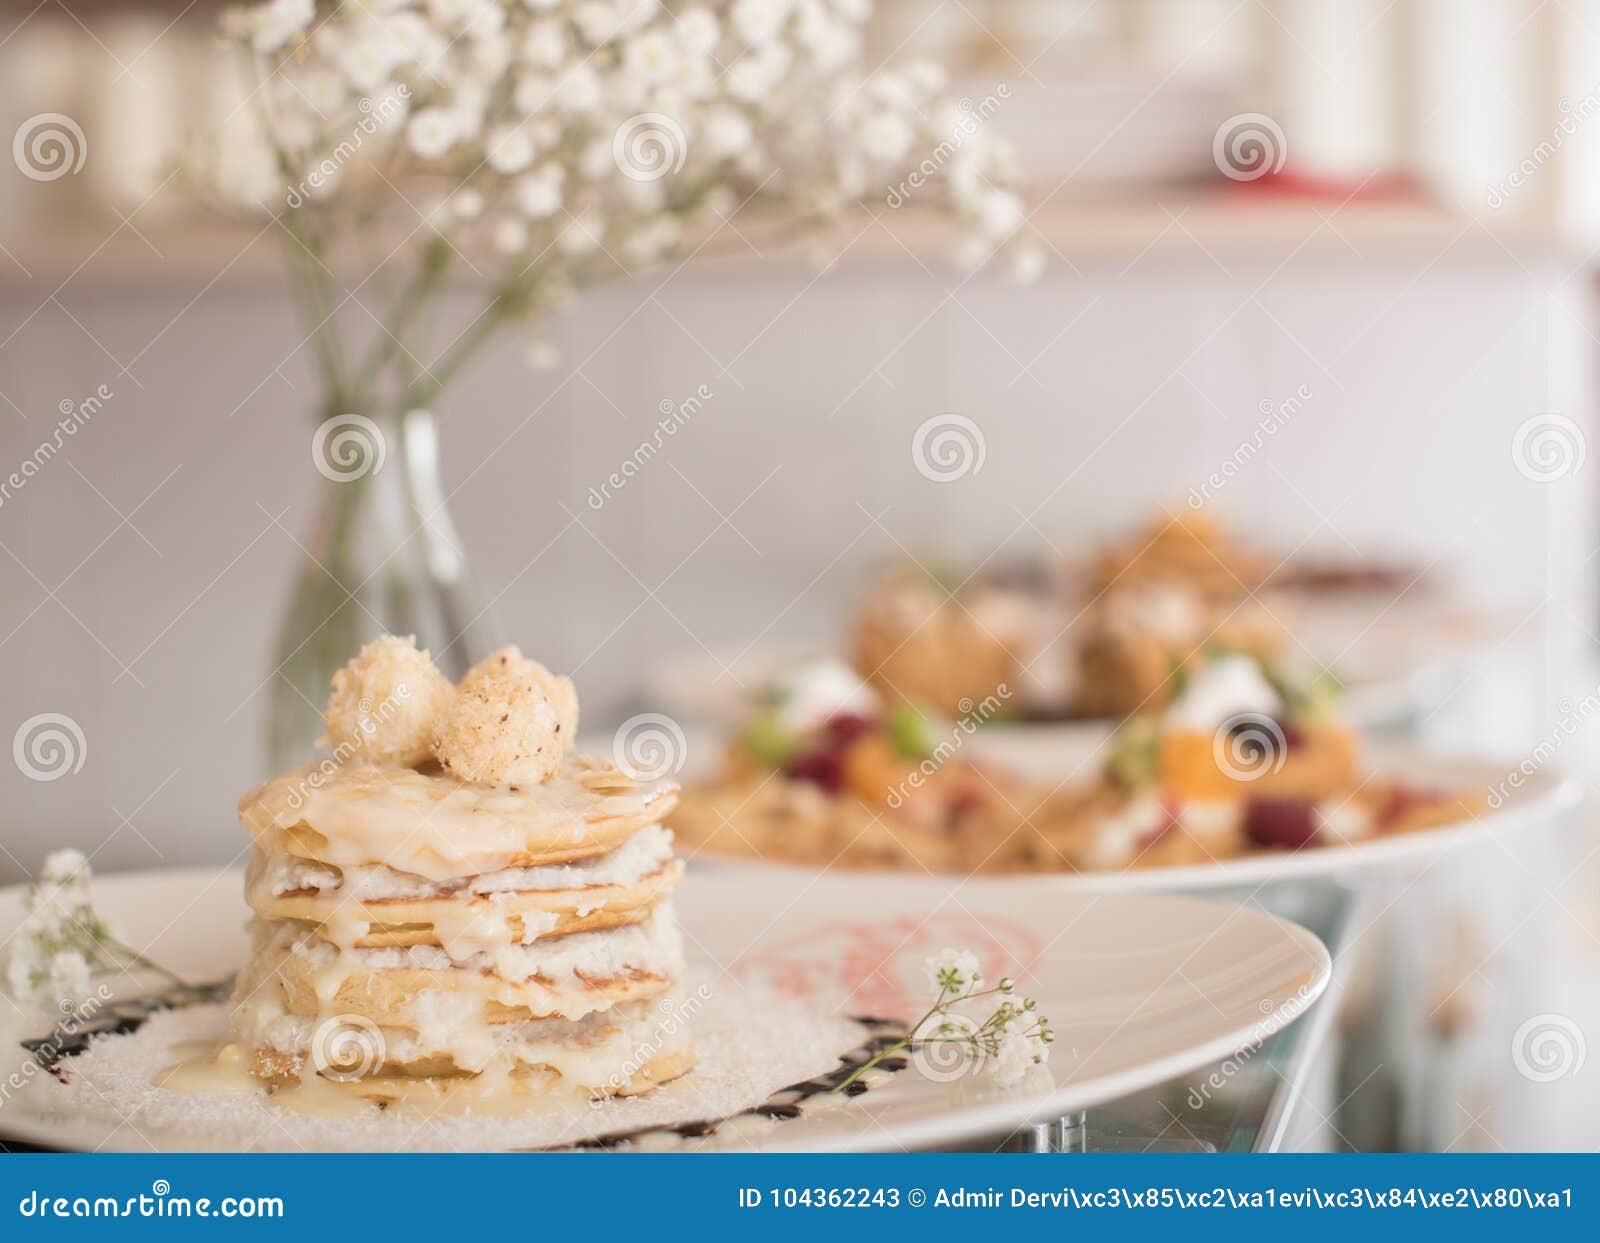 pancakes with decorations and flowers in vase